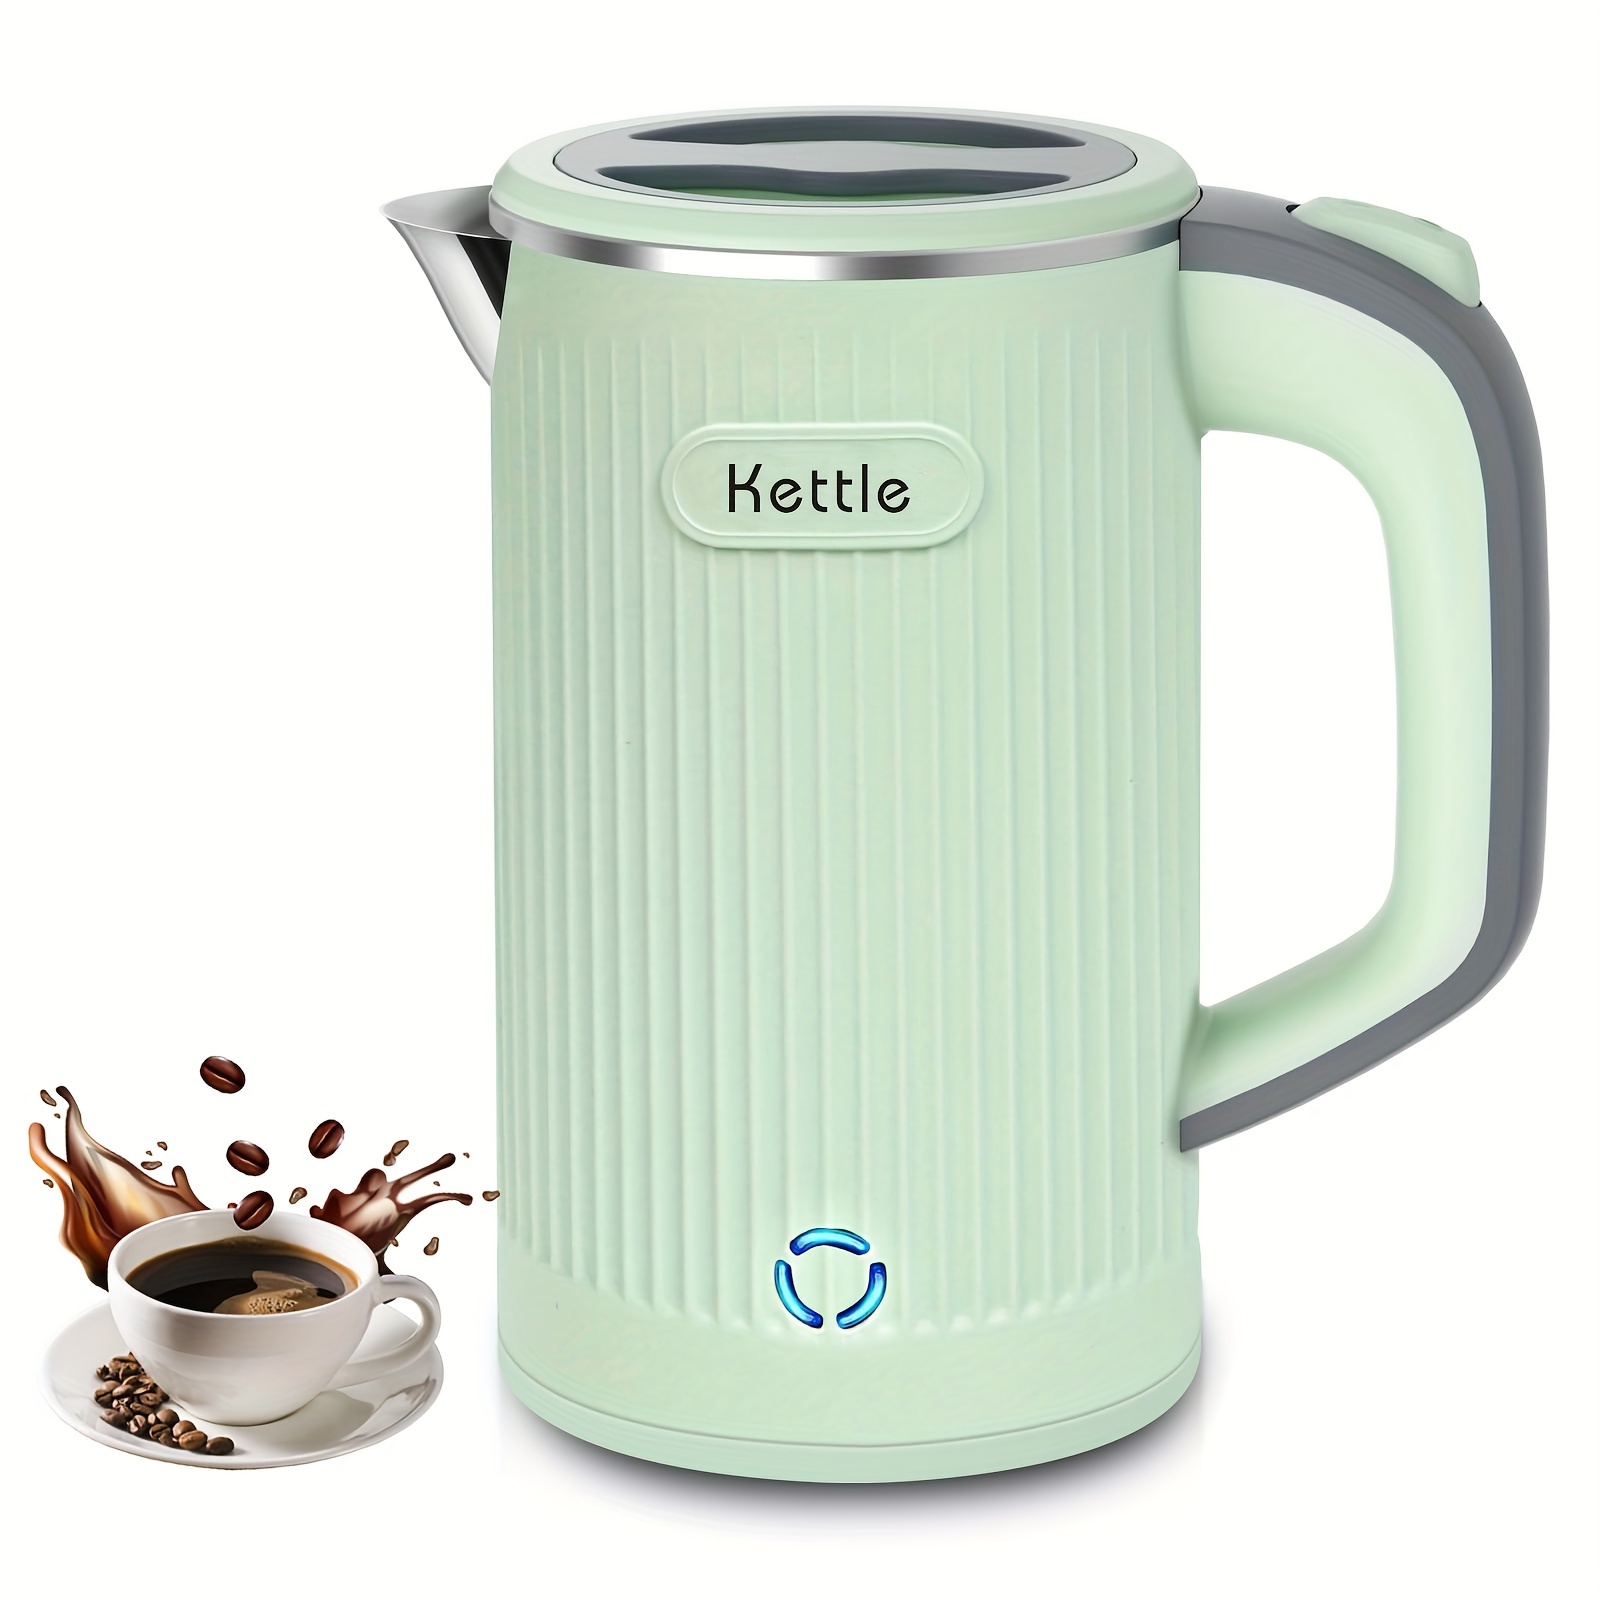 DEVISIB Electric Kettle Temperature Control 4Hours Keep Warm 2L Glass Tea  Coffee Hot Water Boiler Food Grade 304 Stainless Steel